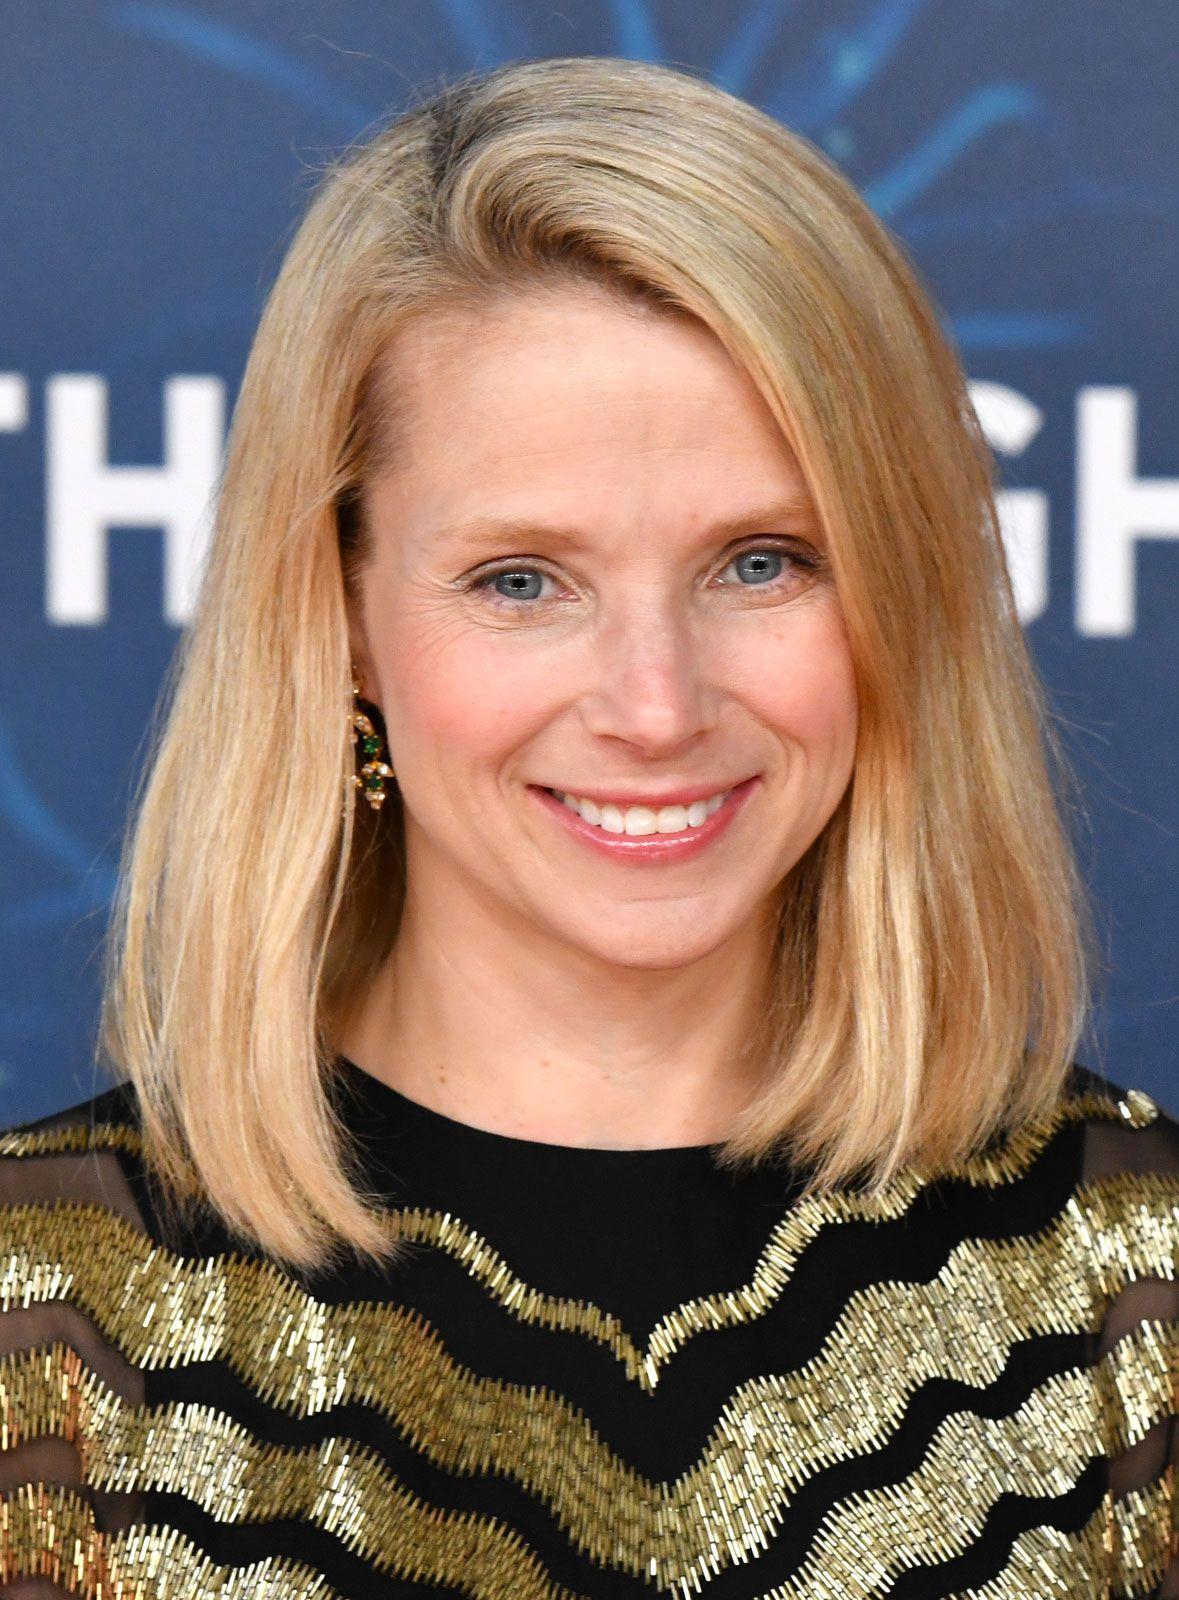 Marissa Mayer’s startup just rolled out photo sharing and event planning apps, and the internet isn’t sure what to think